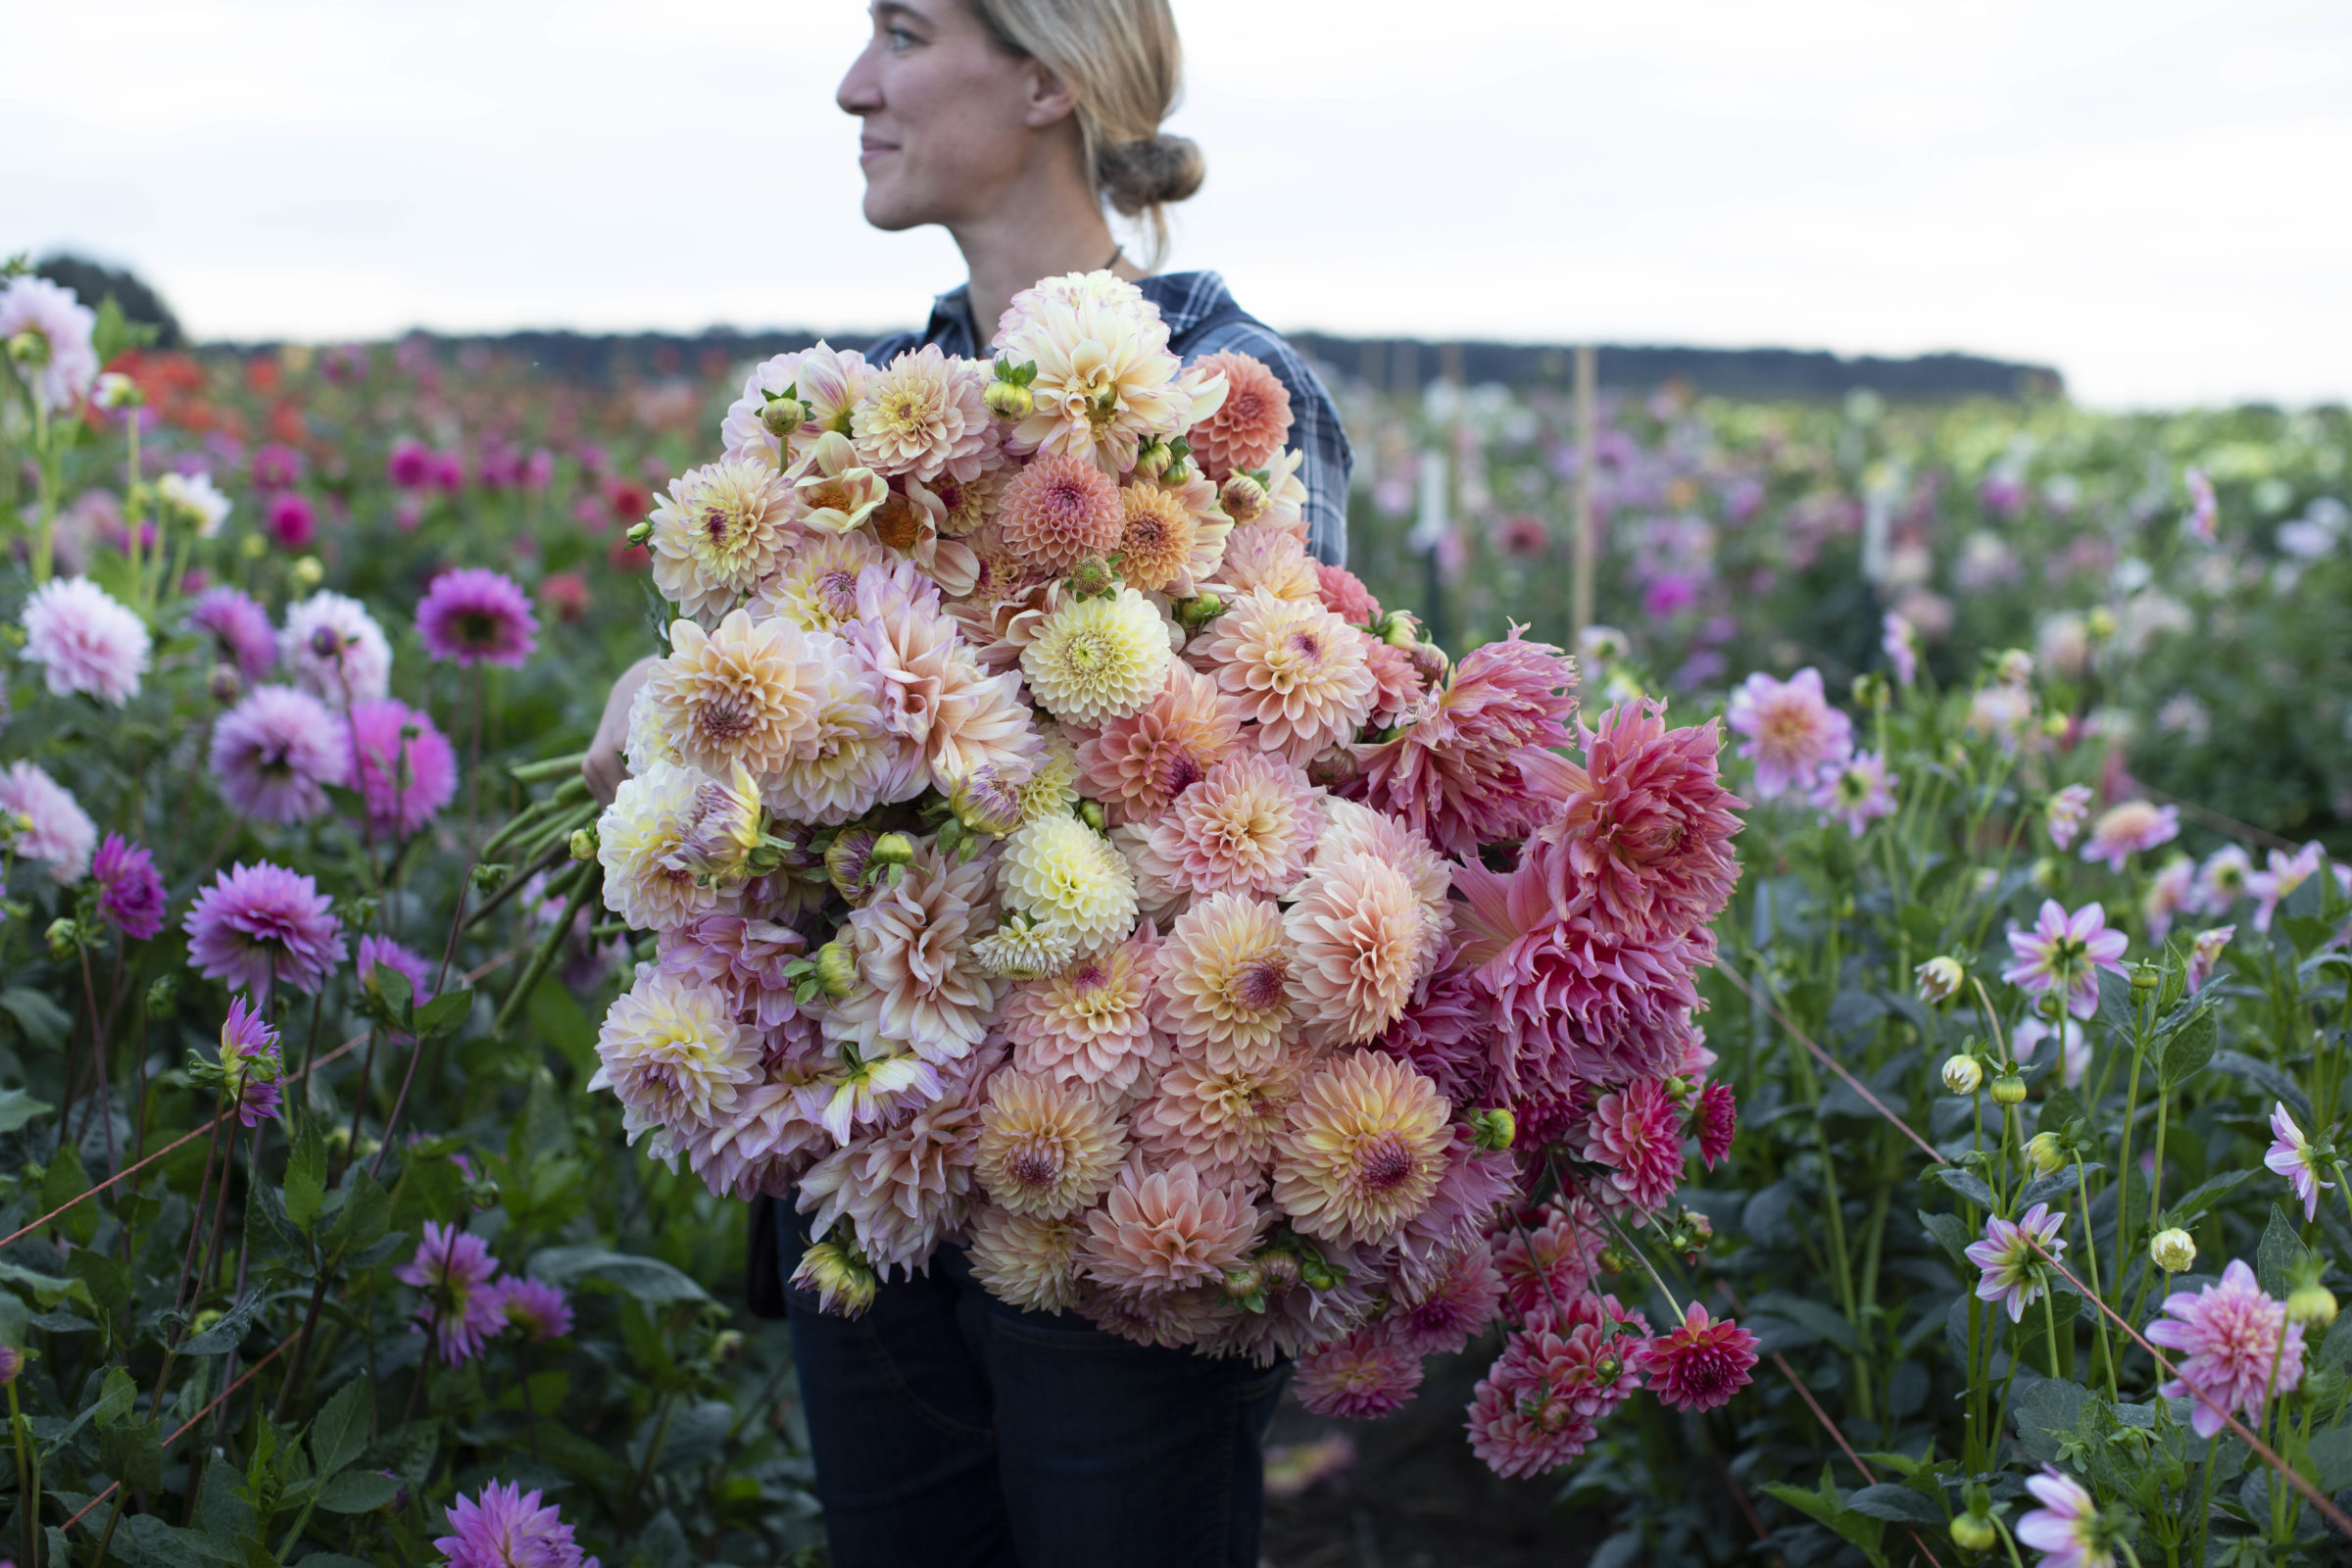 Erin Benzakein with an armload of dahlias